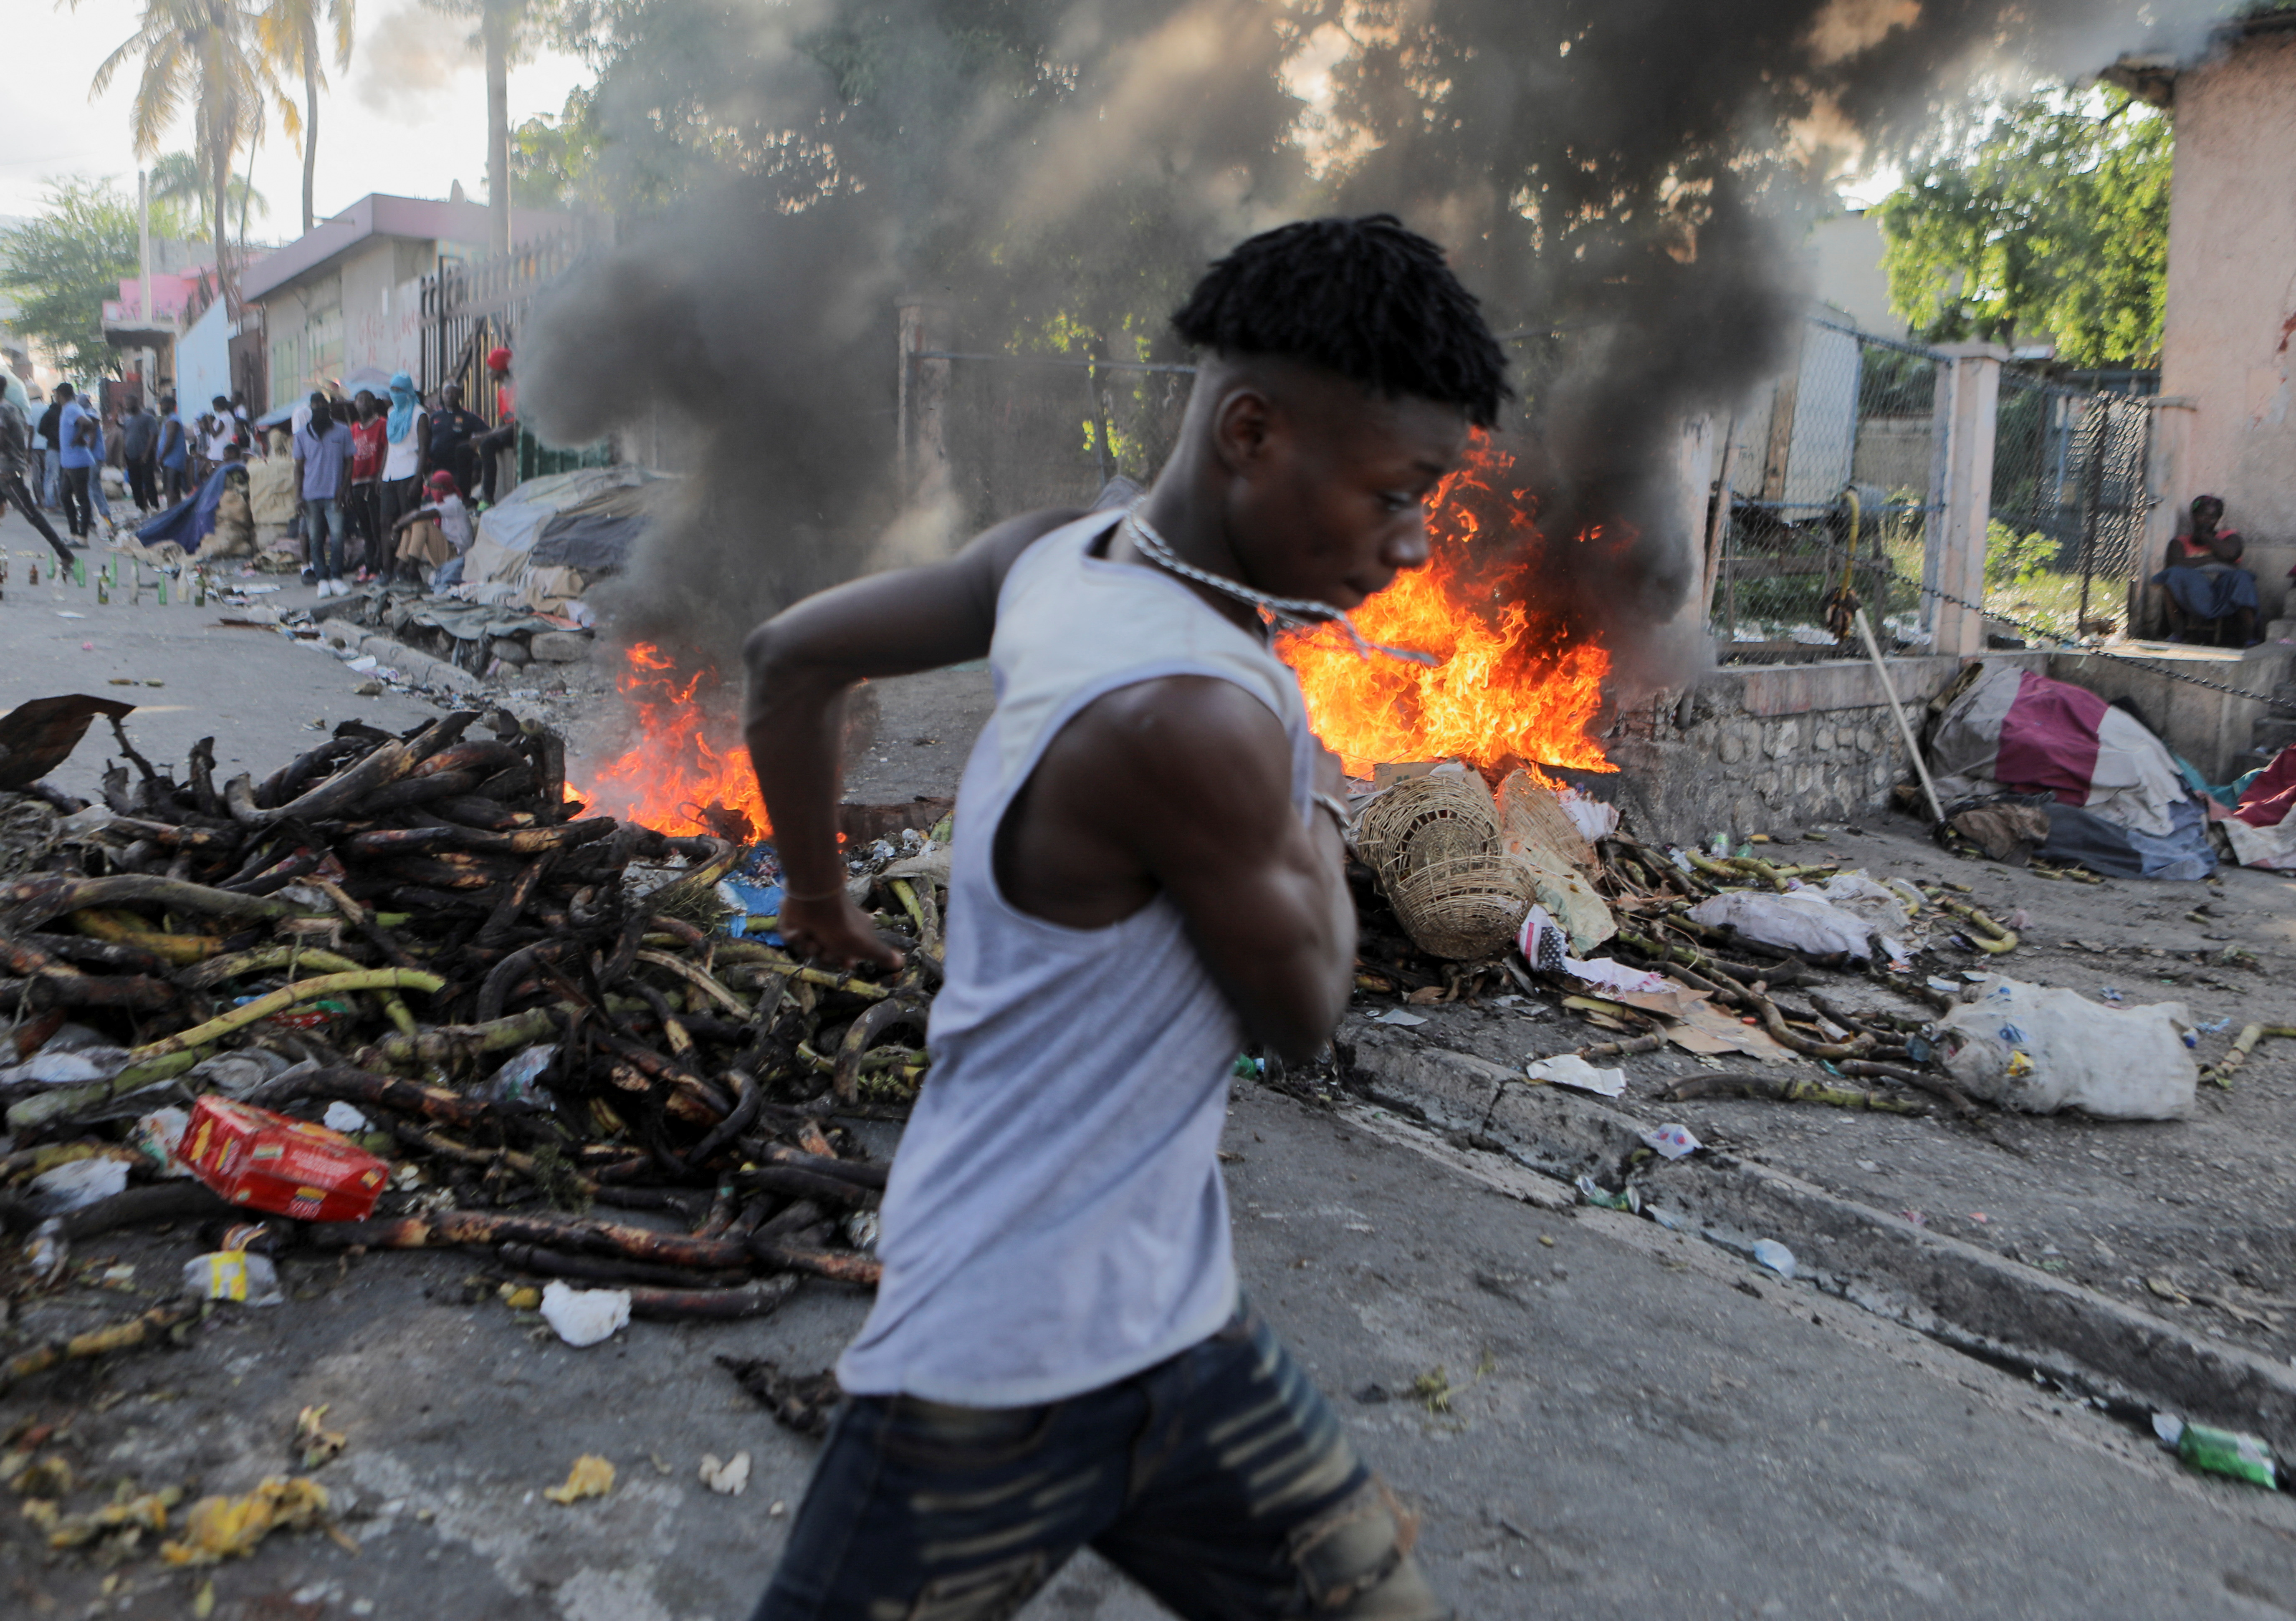 Haitians protest against the government and rising fuel prices, in Port-au-Prince